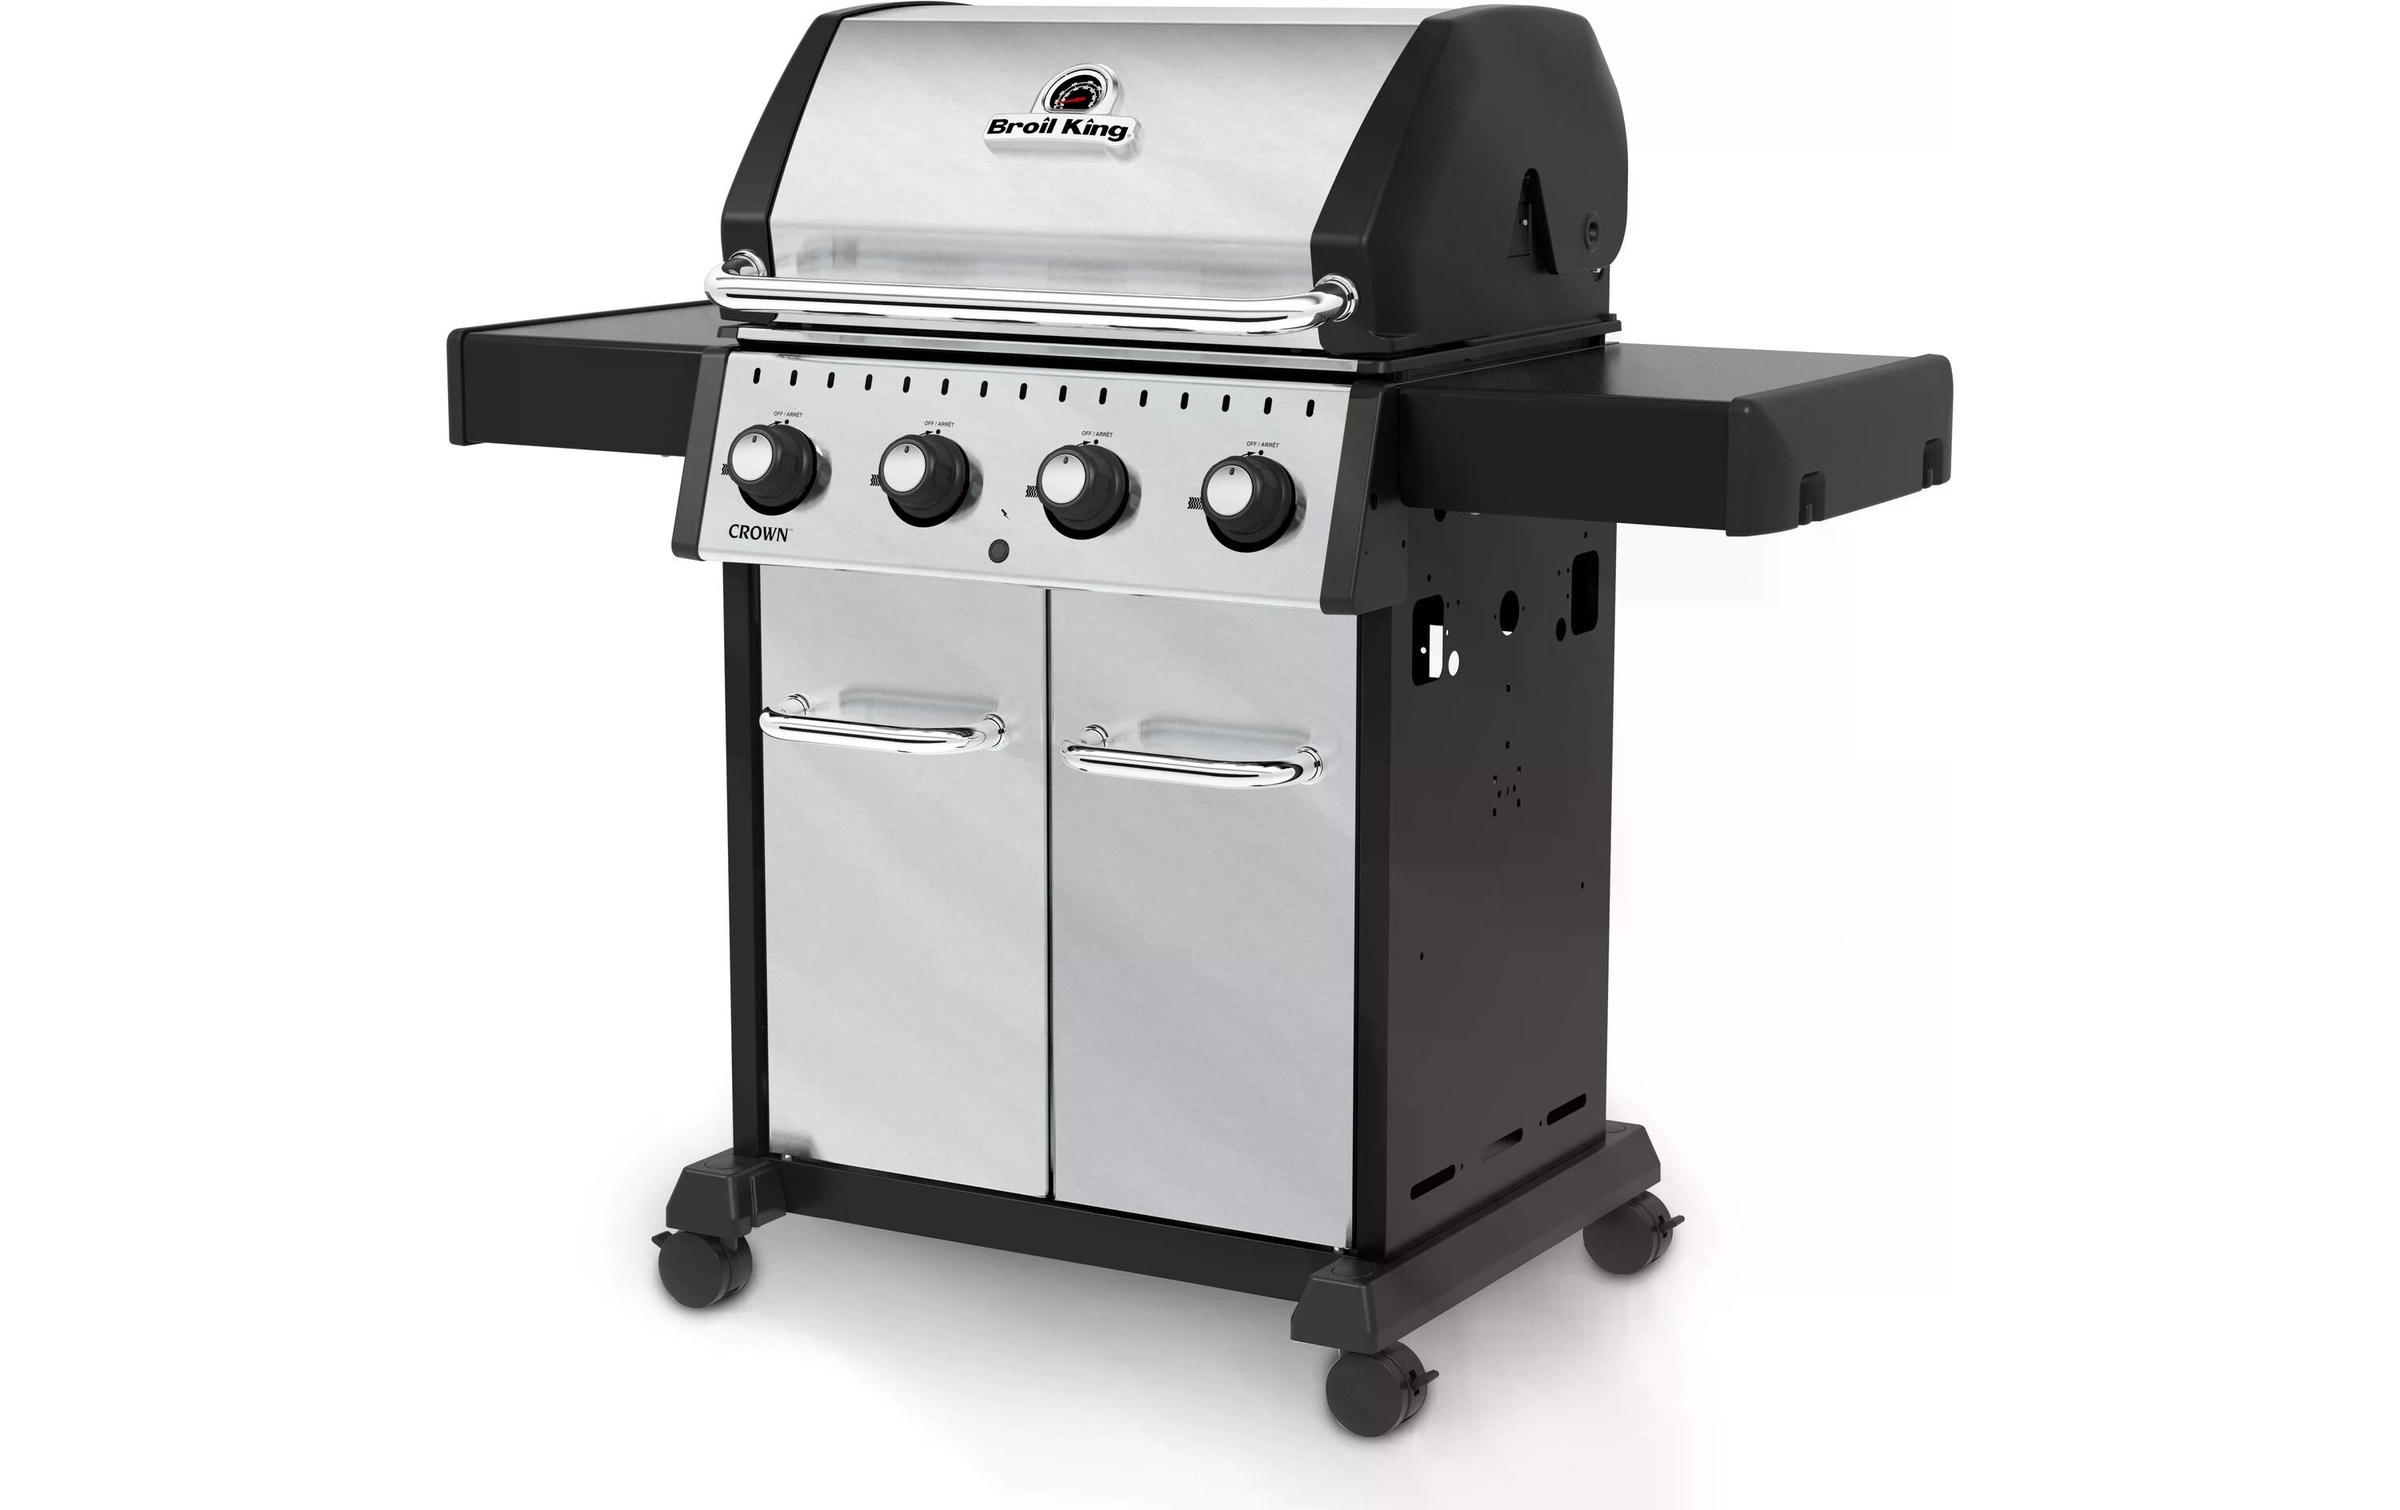 Broil King Gasgrill »Crown S 420«